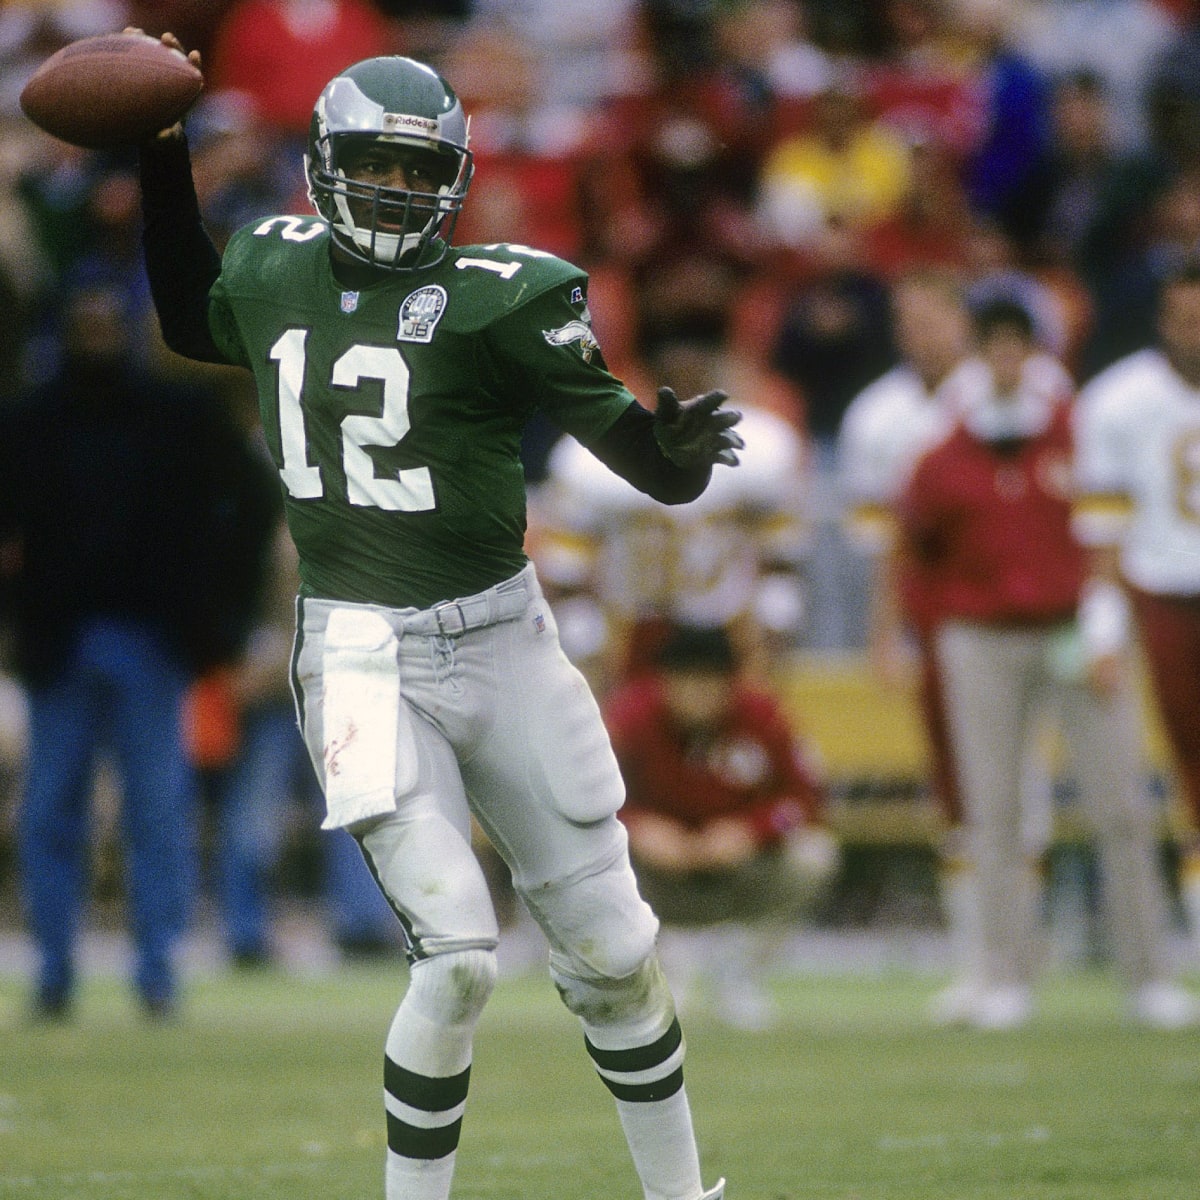 Eagles trying to bring back kelly green jerseys for 2020 uniforms - Sports  Illustrated